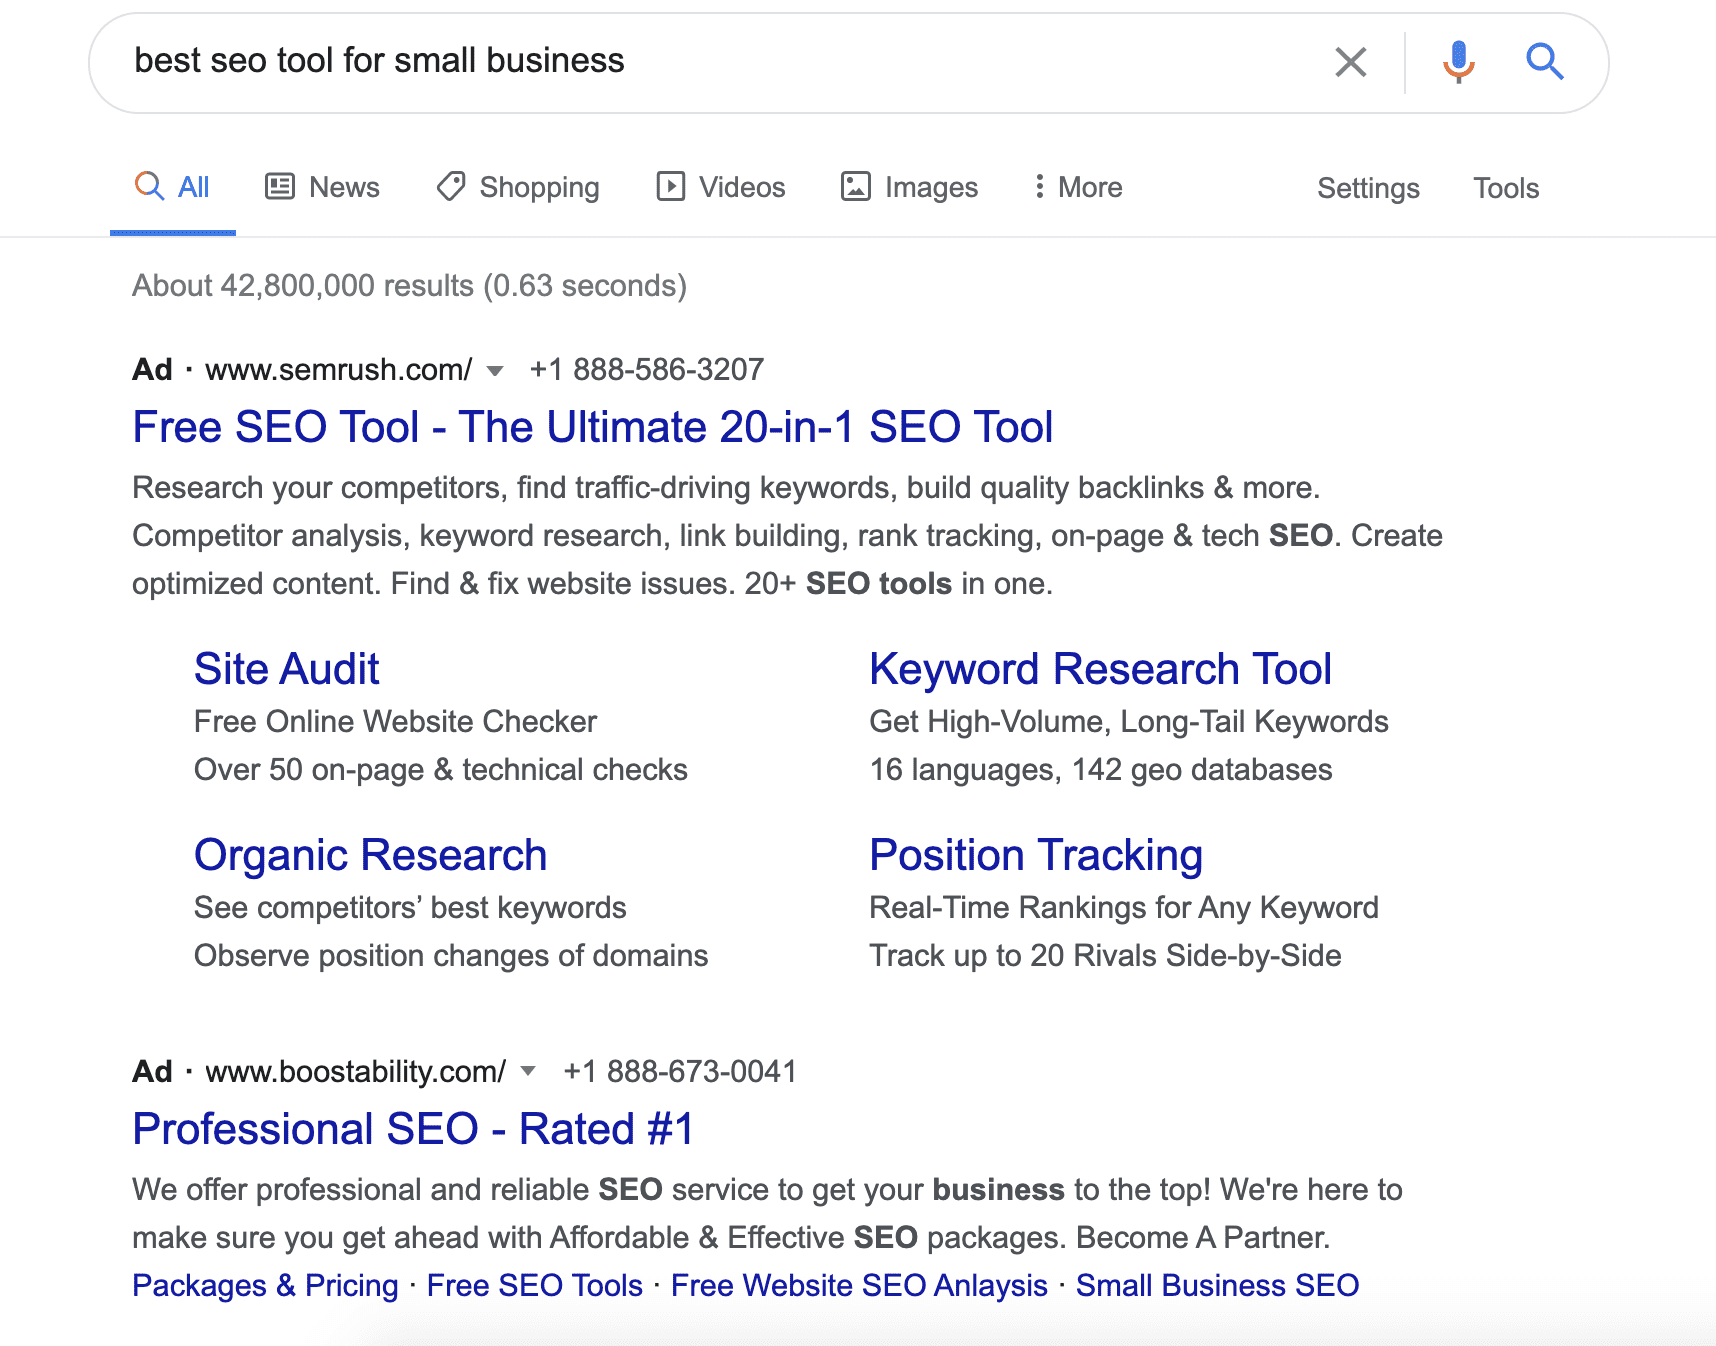 screenshot showing the search results for 'best SEO tool for small business'